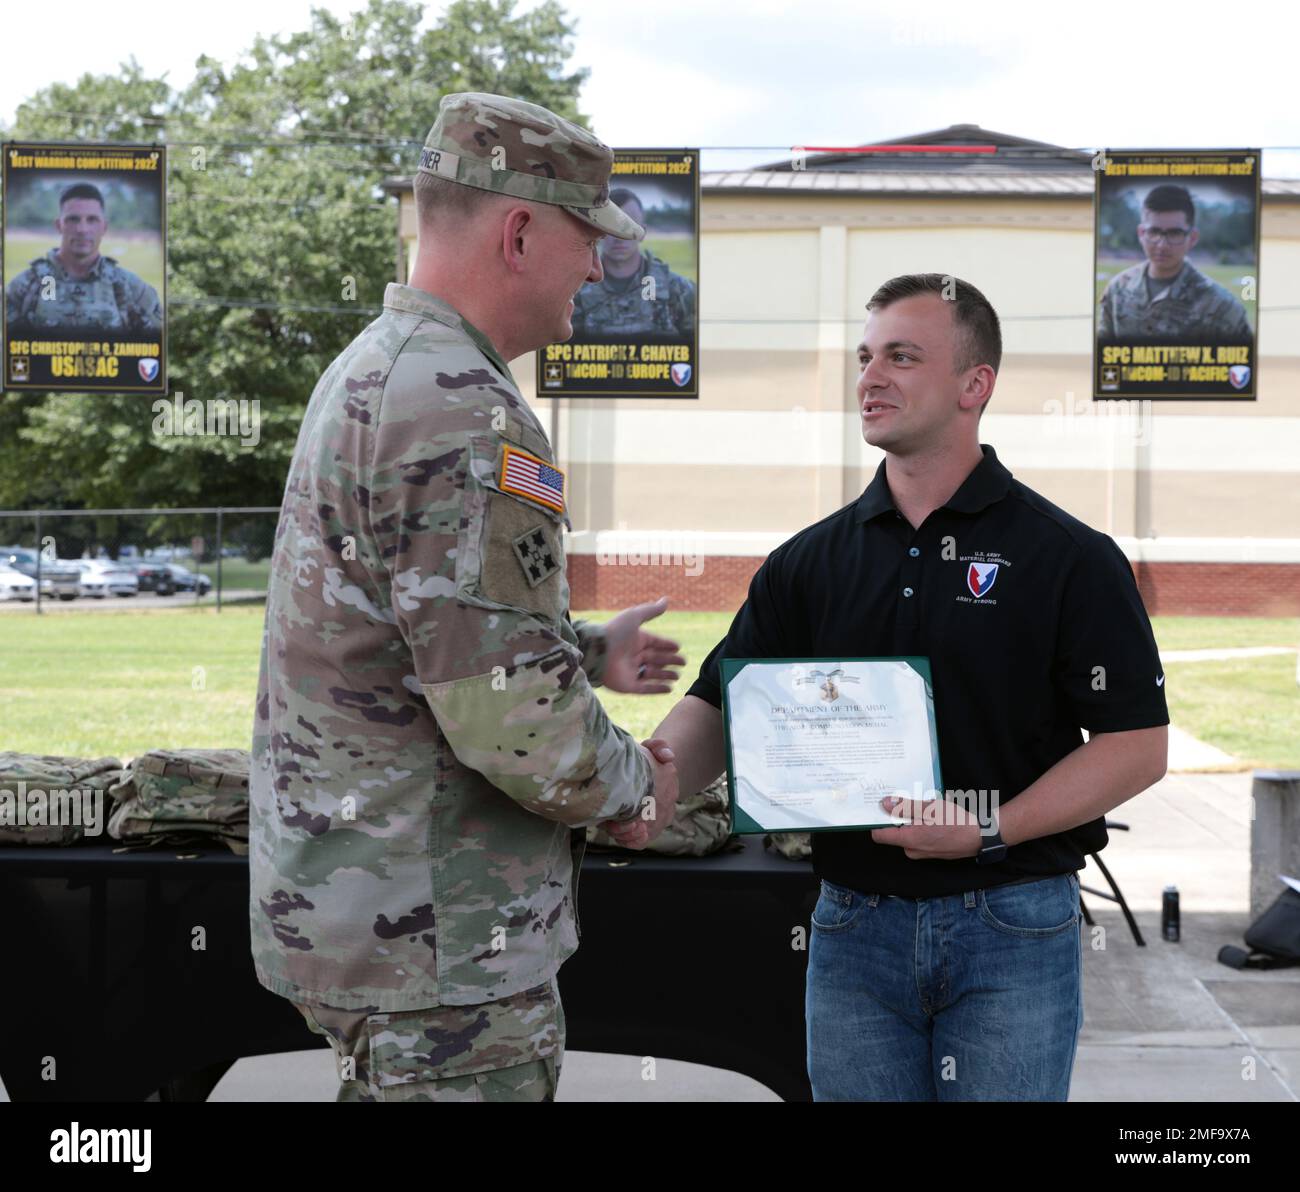 Maj. Gen. Darren Werner, Army Materiel Command acting deputy commanding general, awards an Army Commendation Medal to Spc. Patrick Chayeb following his selection to AMC’s Best Squad during an August 18 luncheon at Redstone Arsenal, Ala. Chayeb serves as a military police officer at U.S. Army Garrison-Benelux. Stock Photo